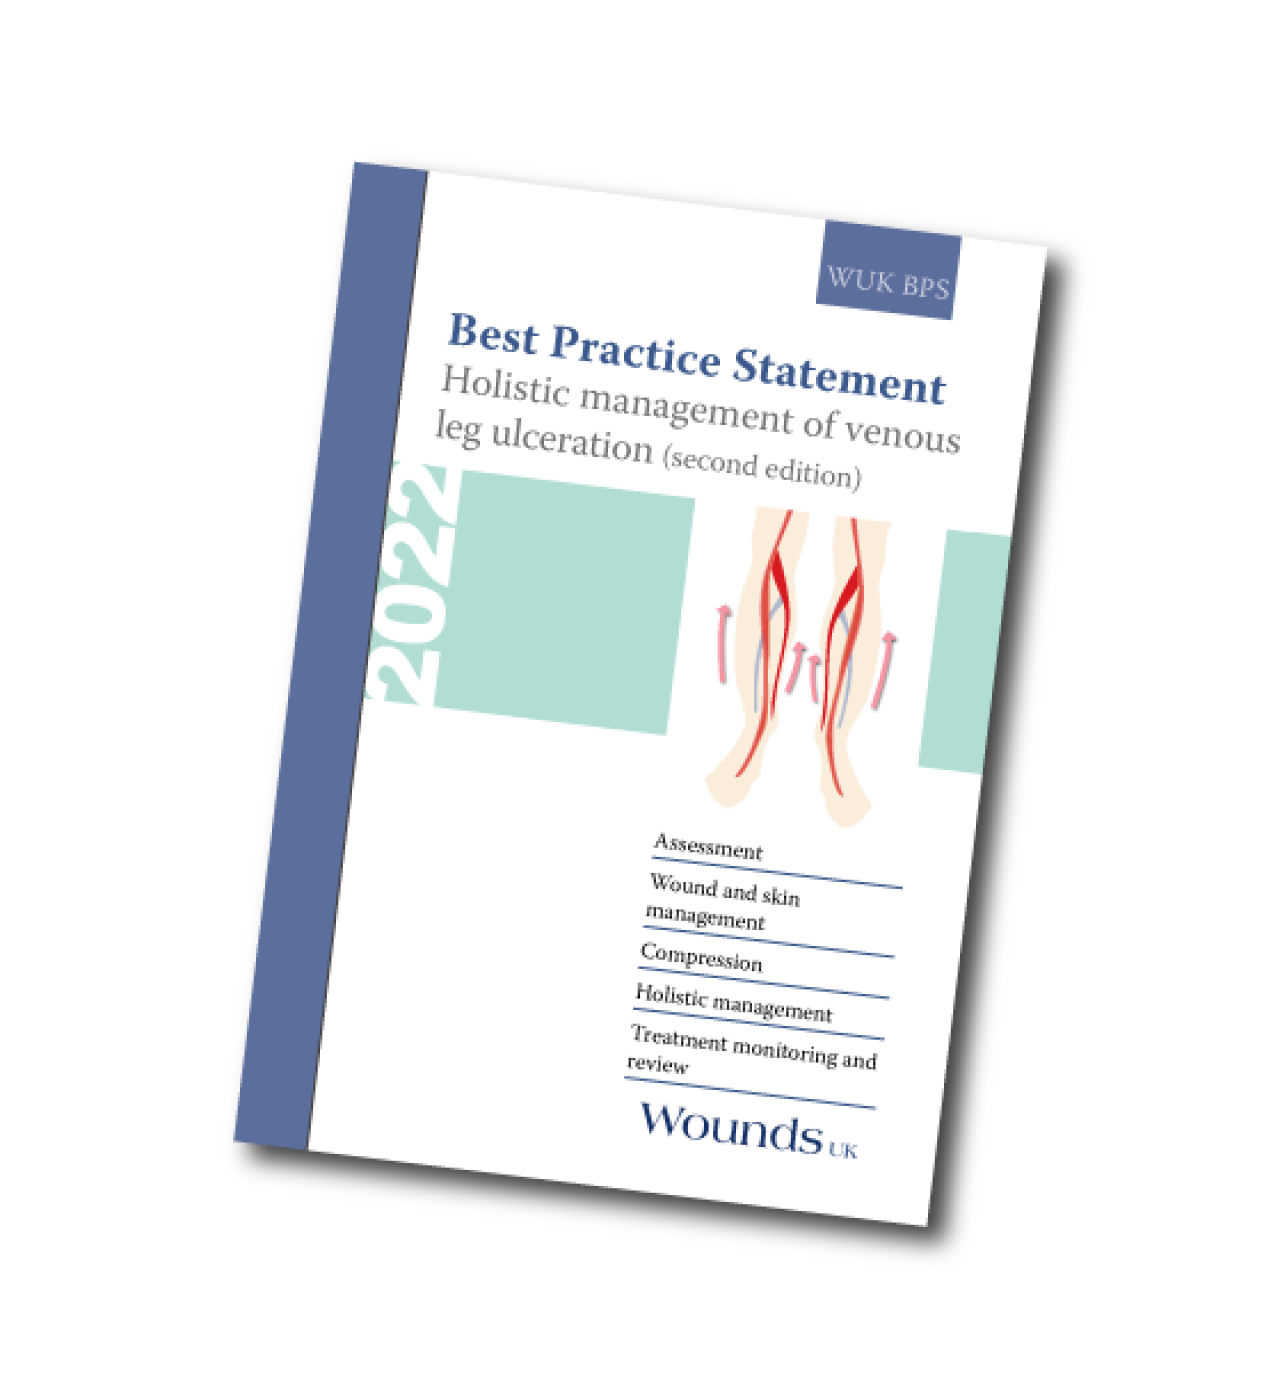 Best Practice Statement: The use of compression therapy for